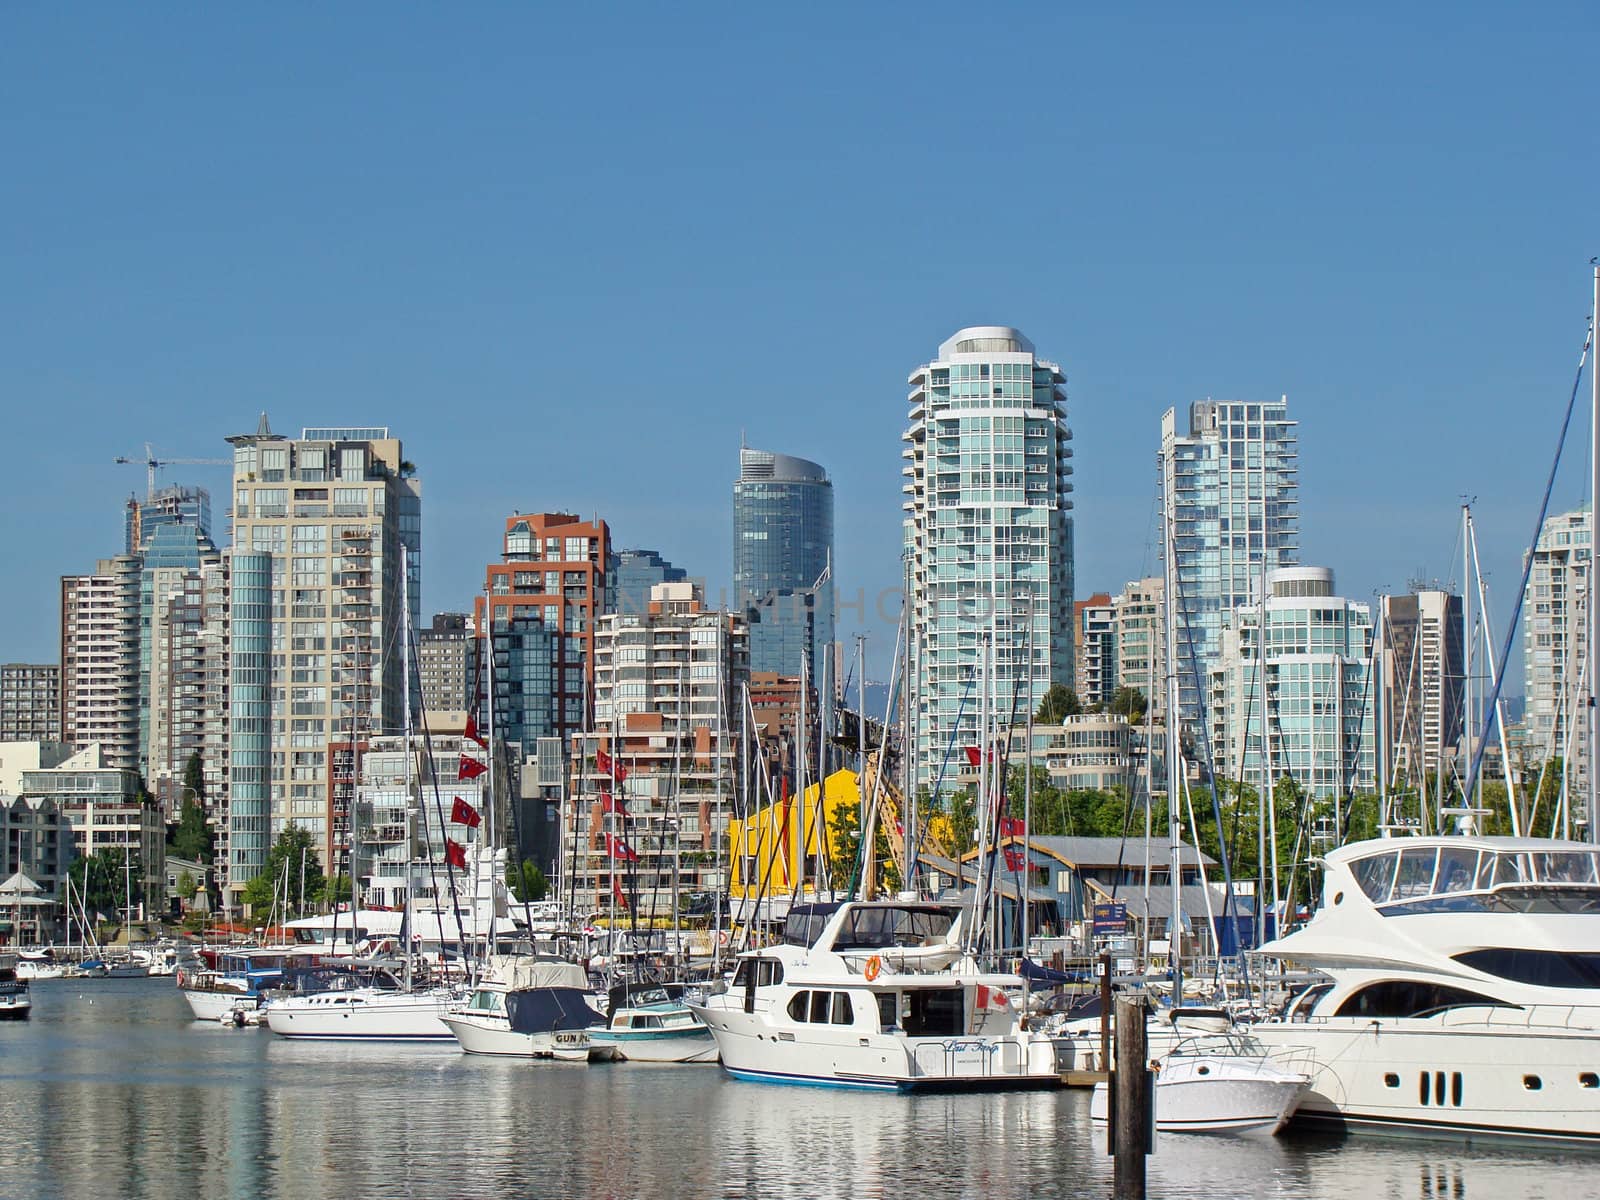 Boats in False Creek, Vancouver, Canada by Canadian